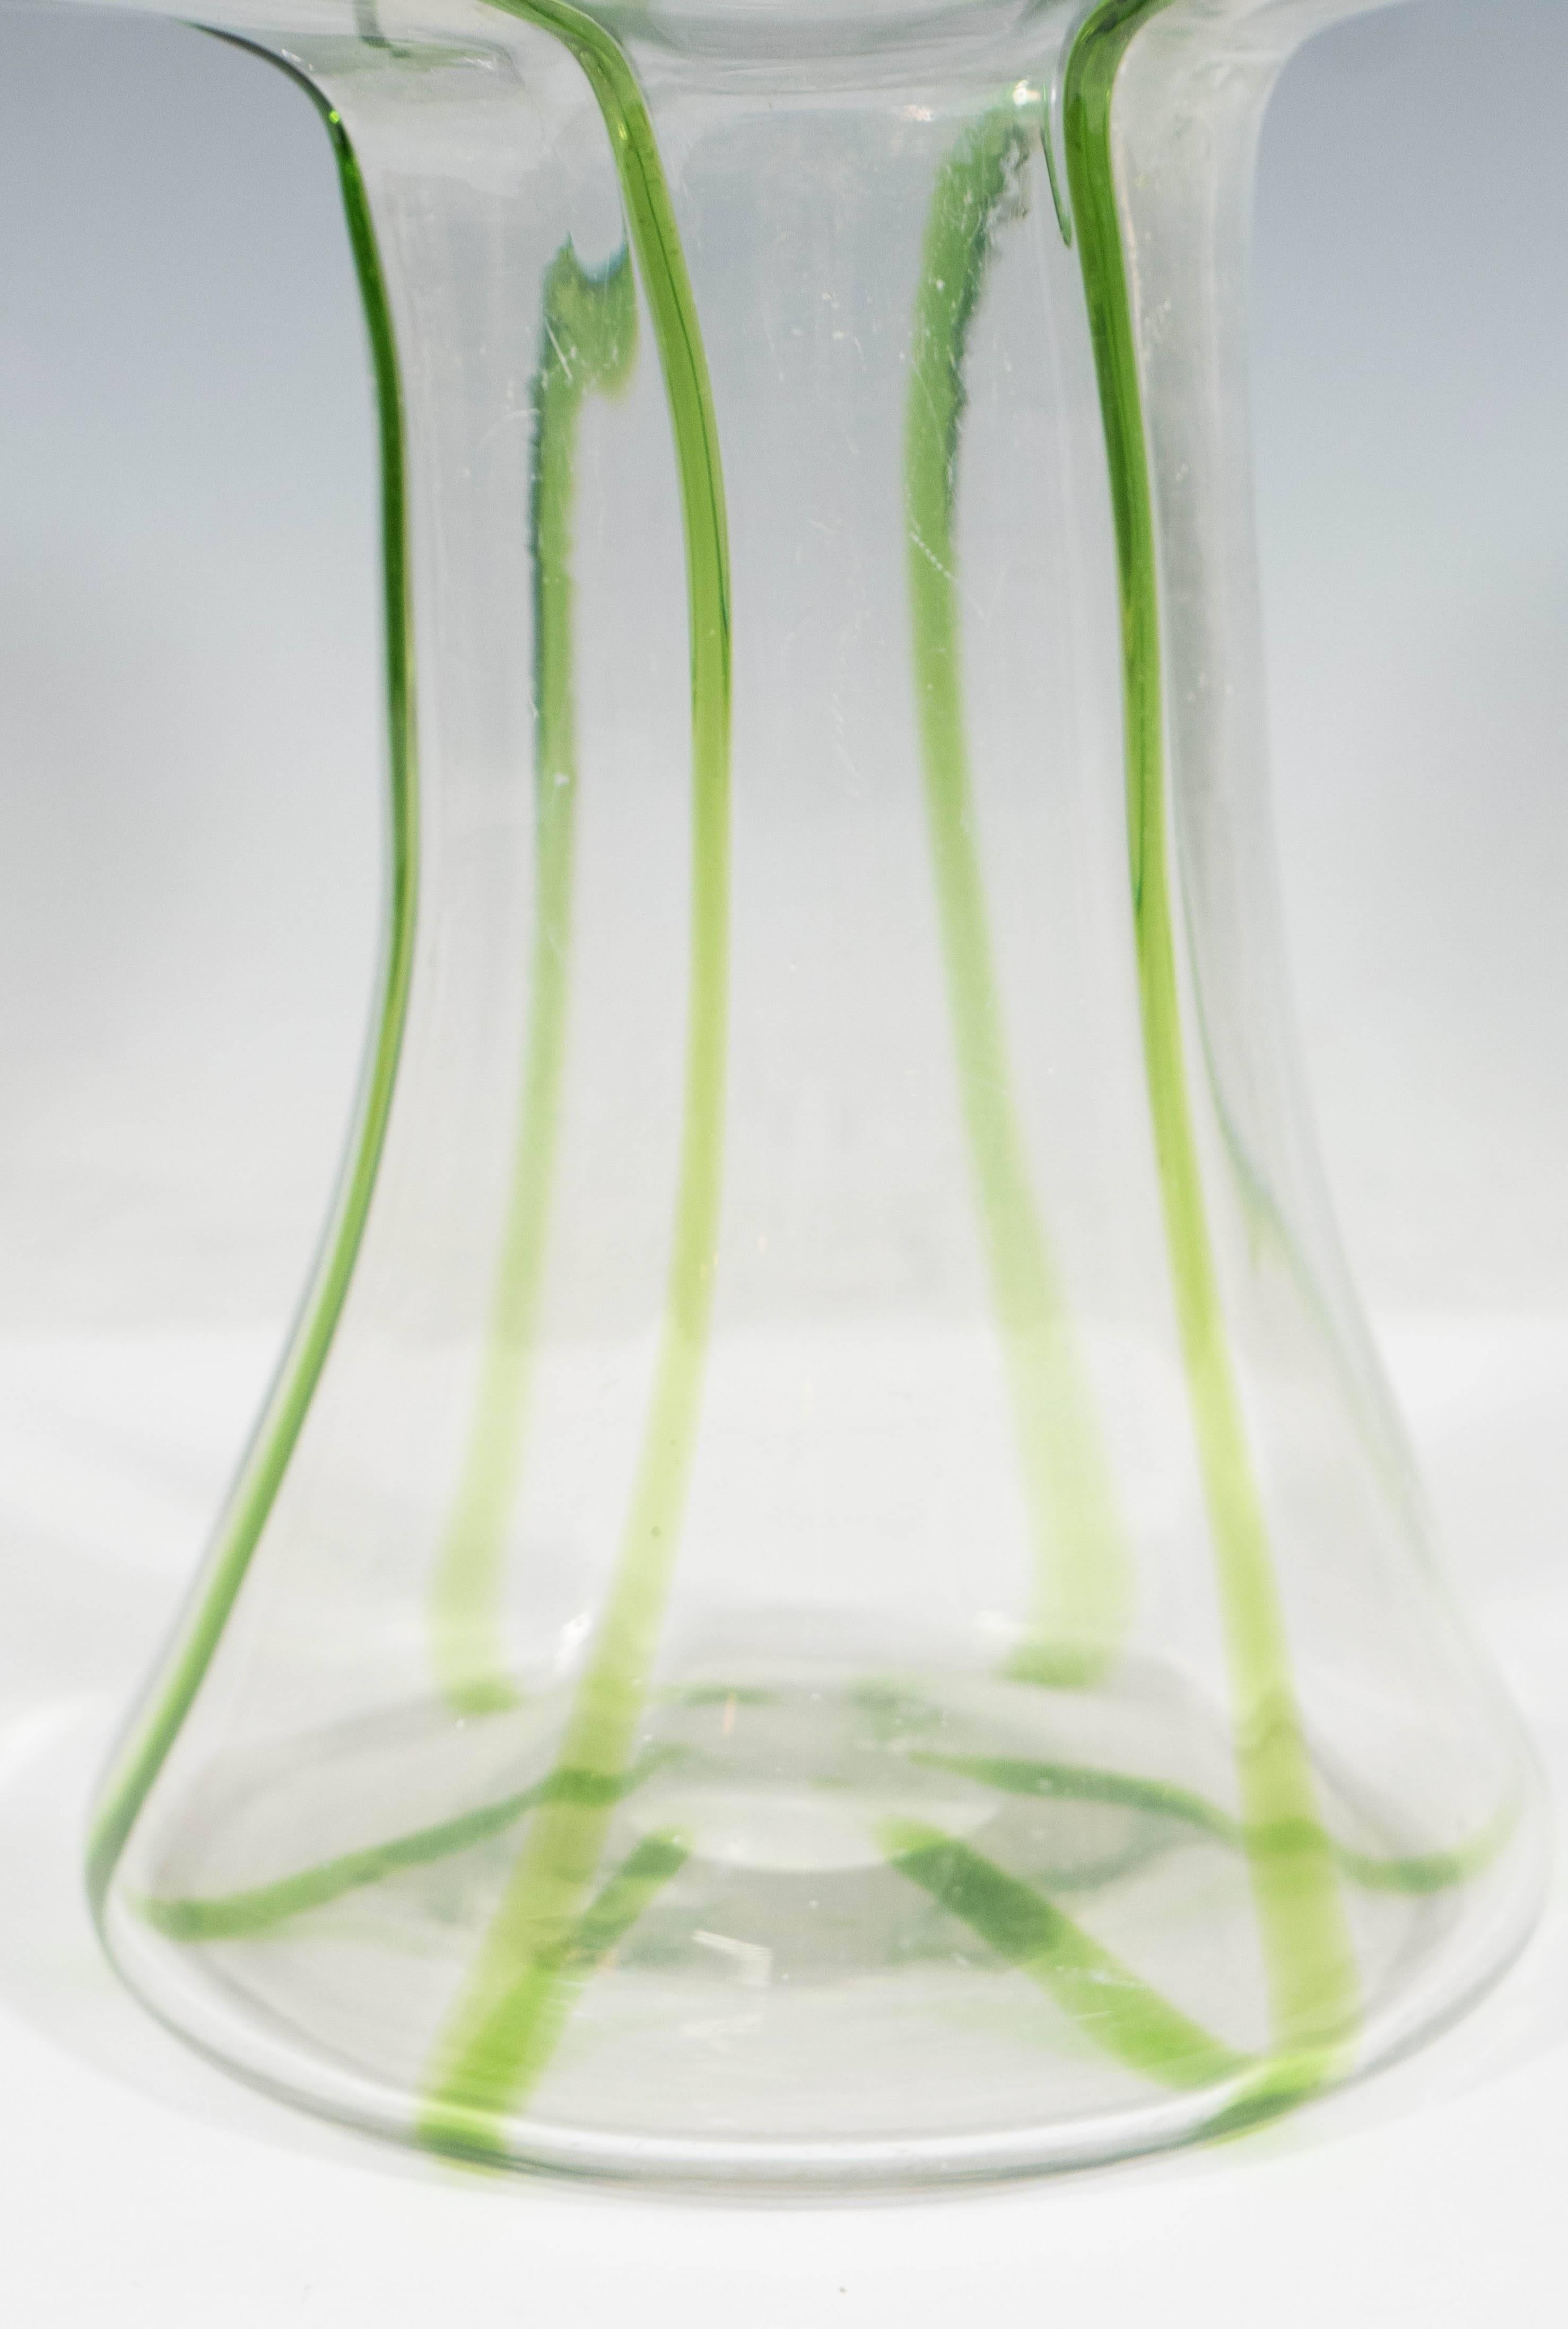 An early 20th century handblown glass vase by Stuart & Sons, reflecting the organic Art Nouveau style, with folded rim and bulbous top, detailed with green and turquoise peacock eye trails (otherwise known as 'Cairngorm'). The vase remains in very